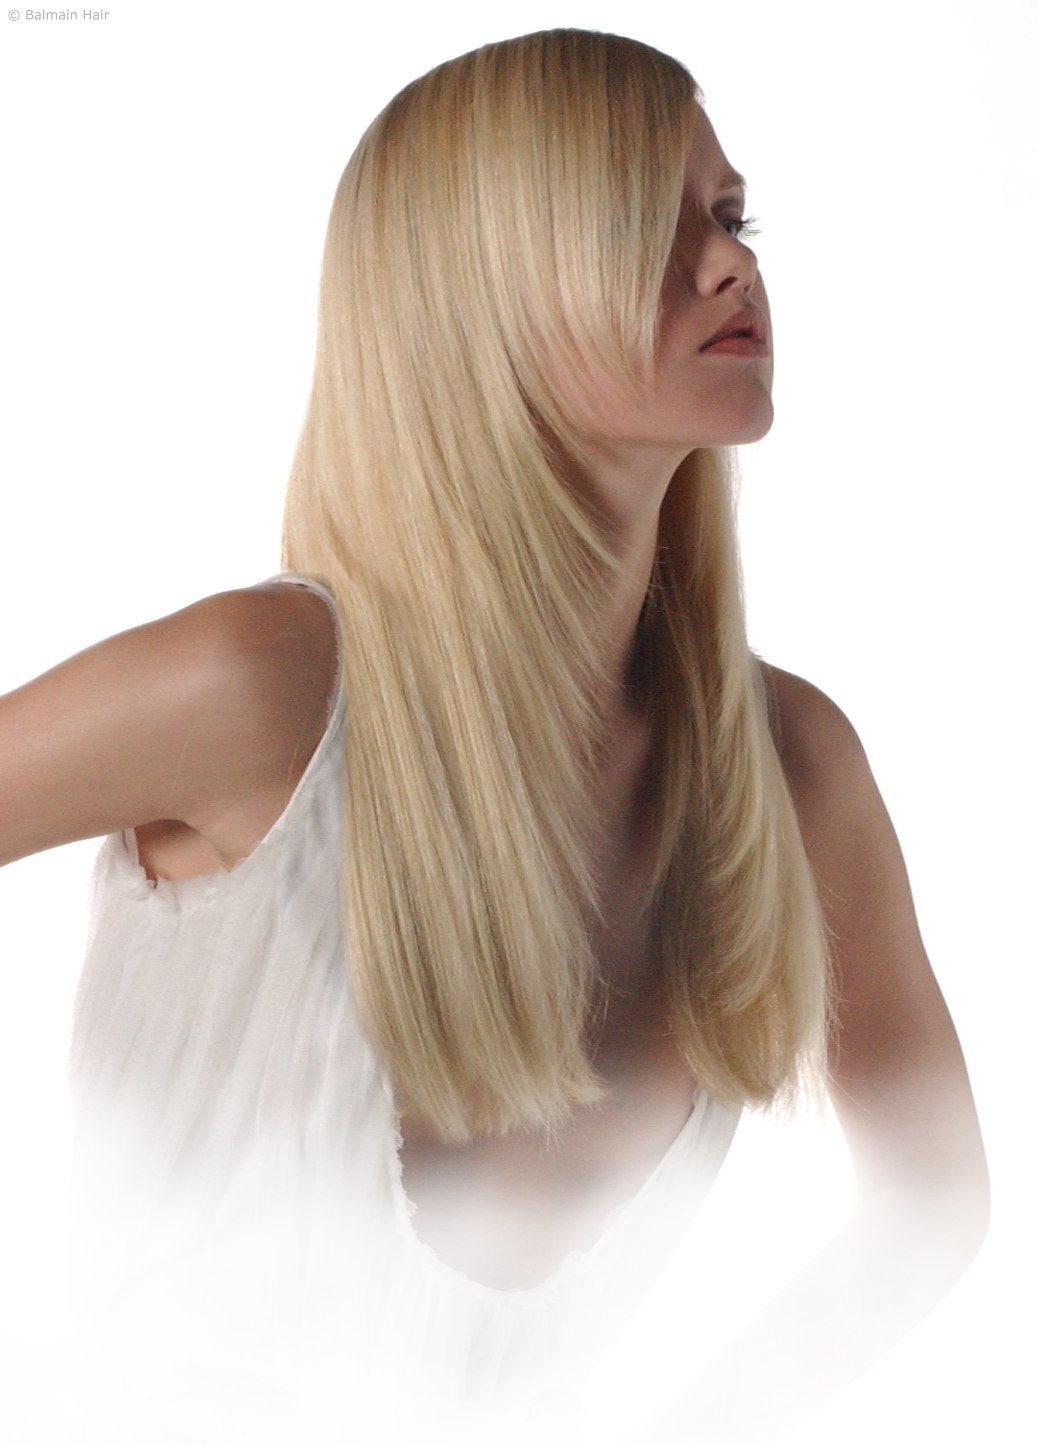 Model with fine hair and extensions